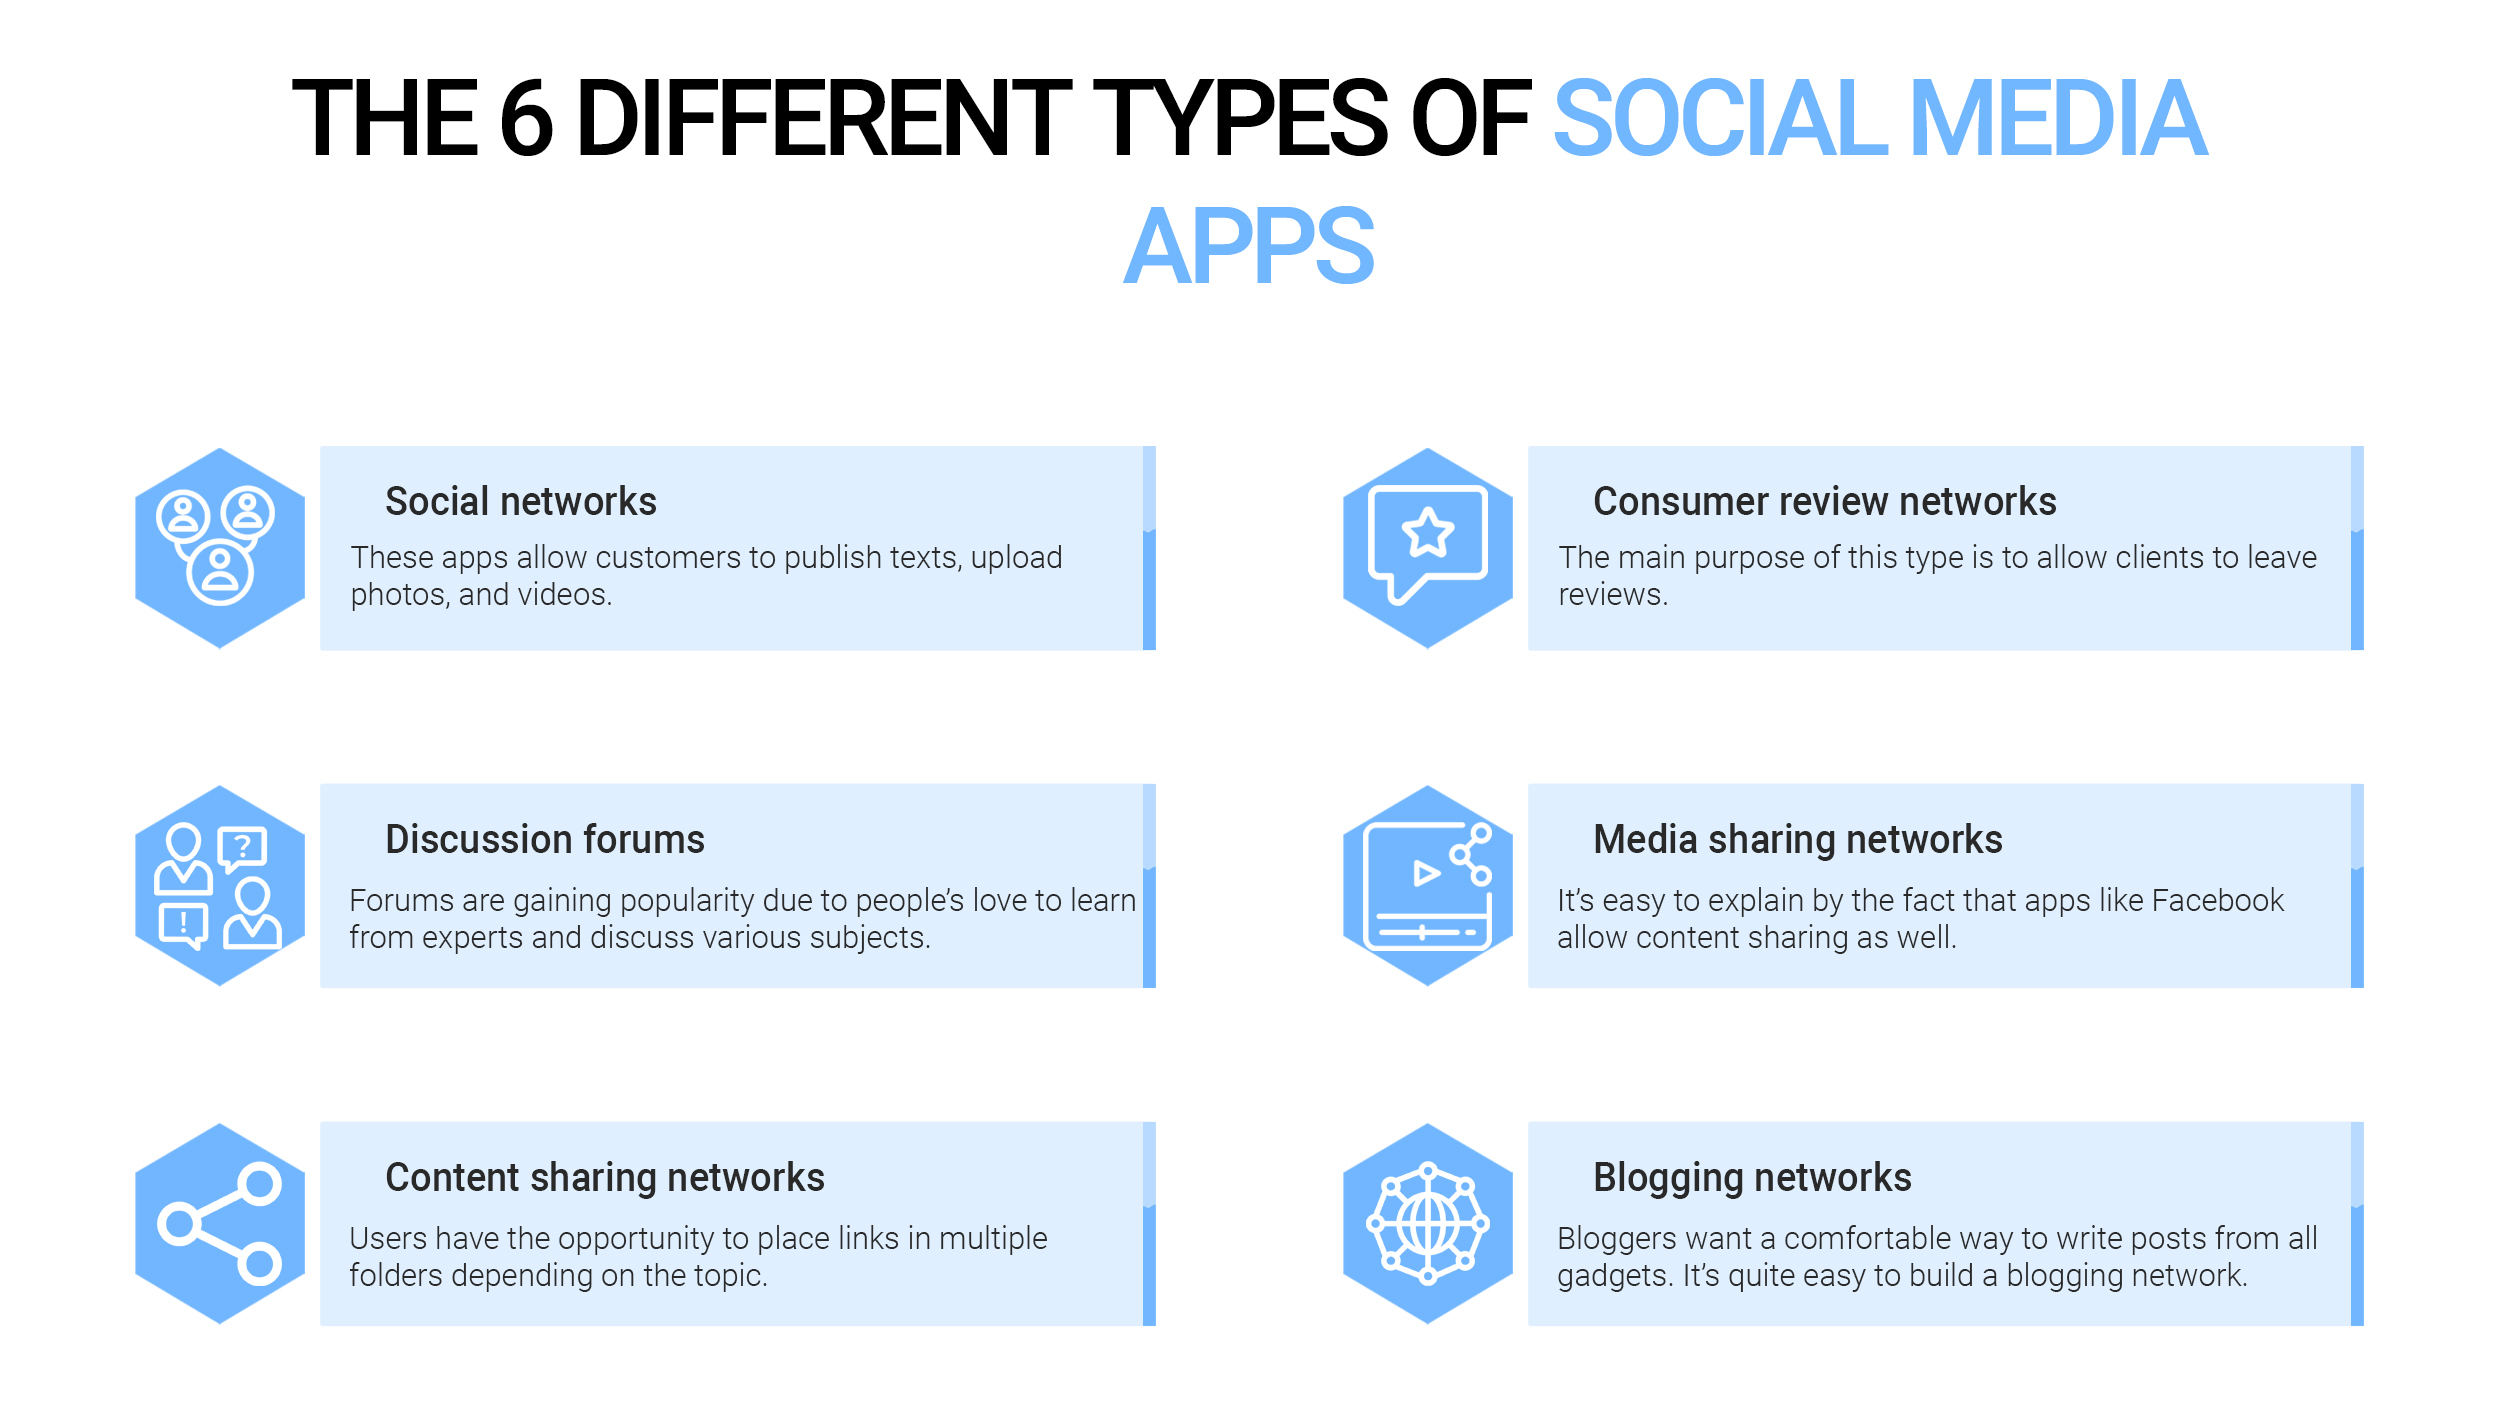 The 6 different types of social media apps